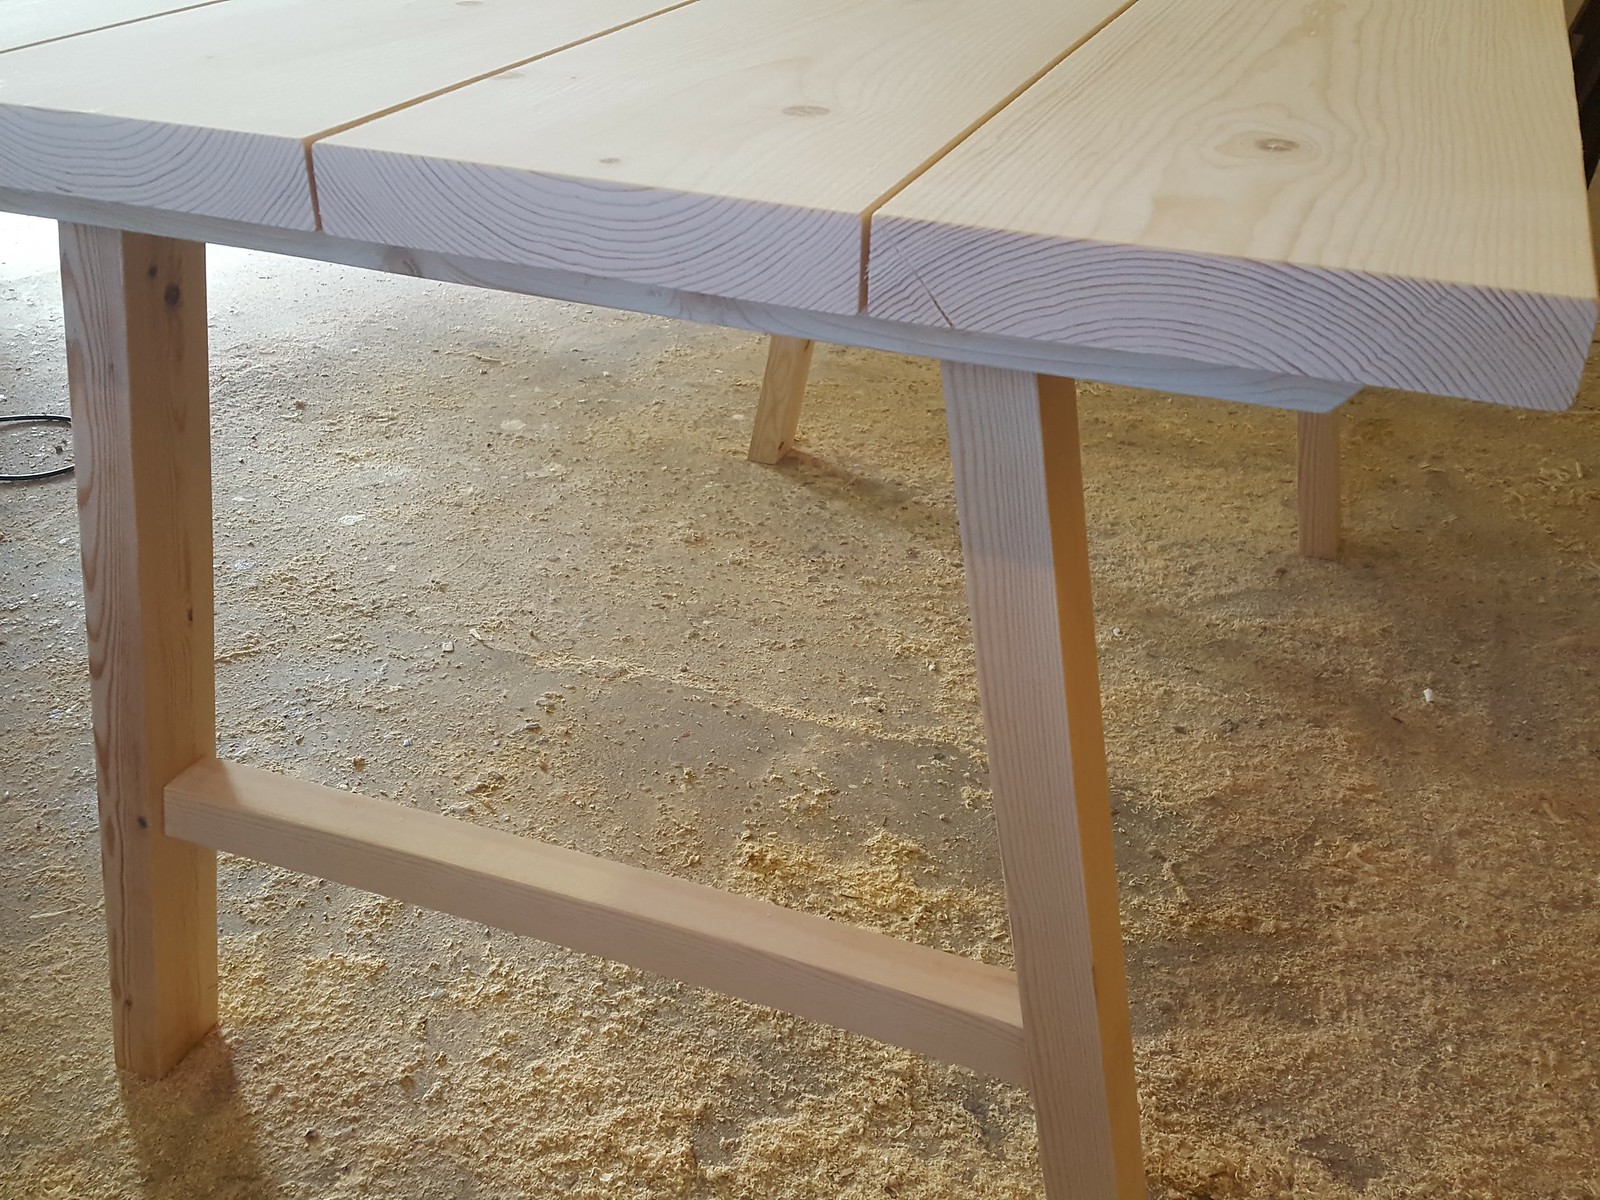 Guide: Make a Nordic Wood Dining Table